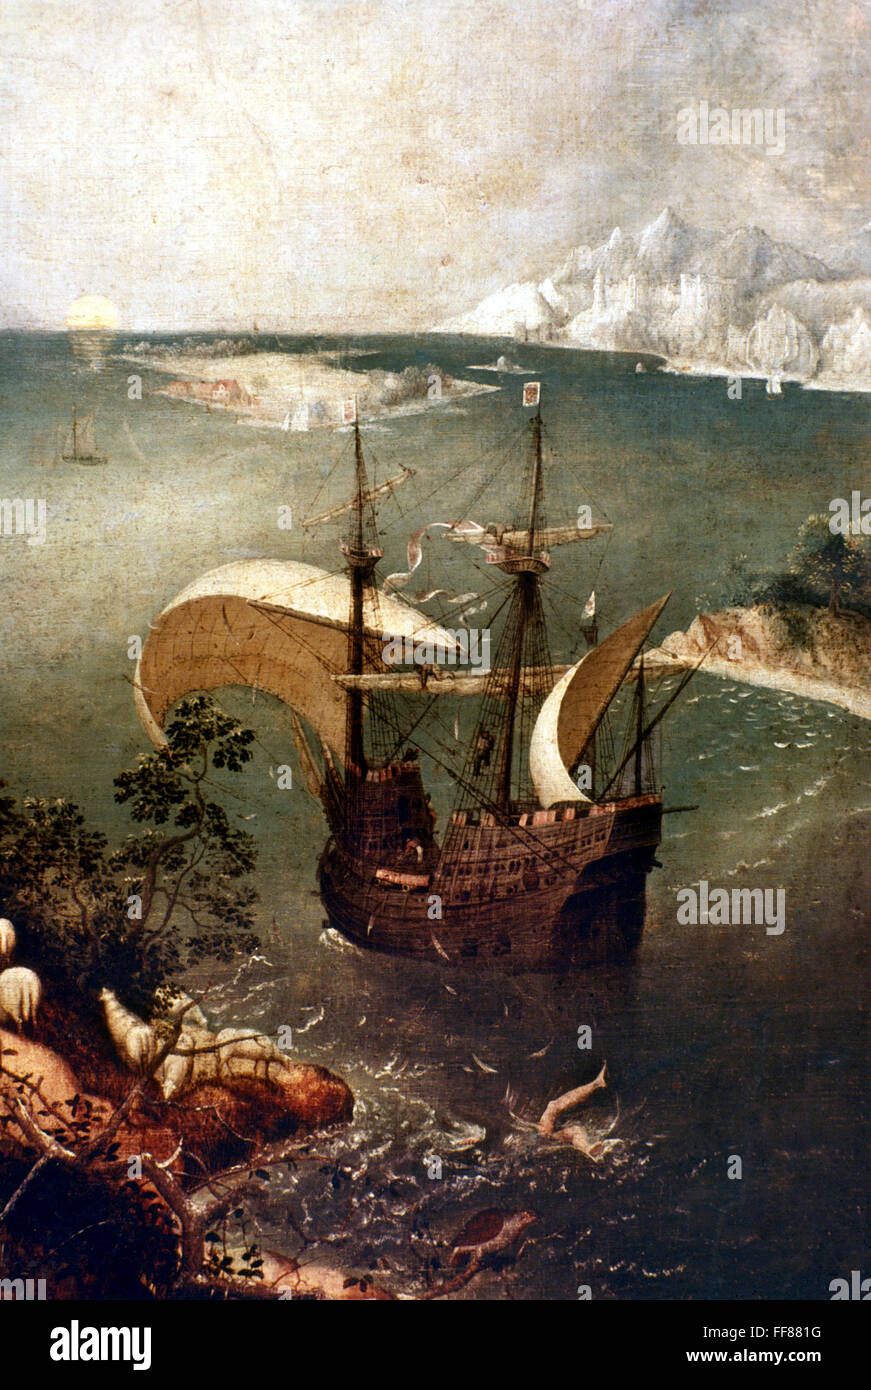 Bruegel Fall Of Icarus Nlandscape With The Fall Of Icarus Detail Oil On Panel